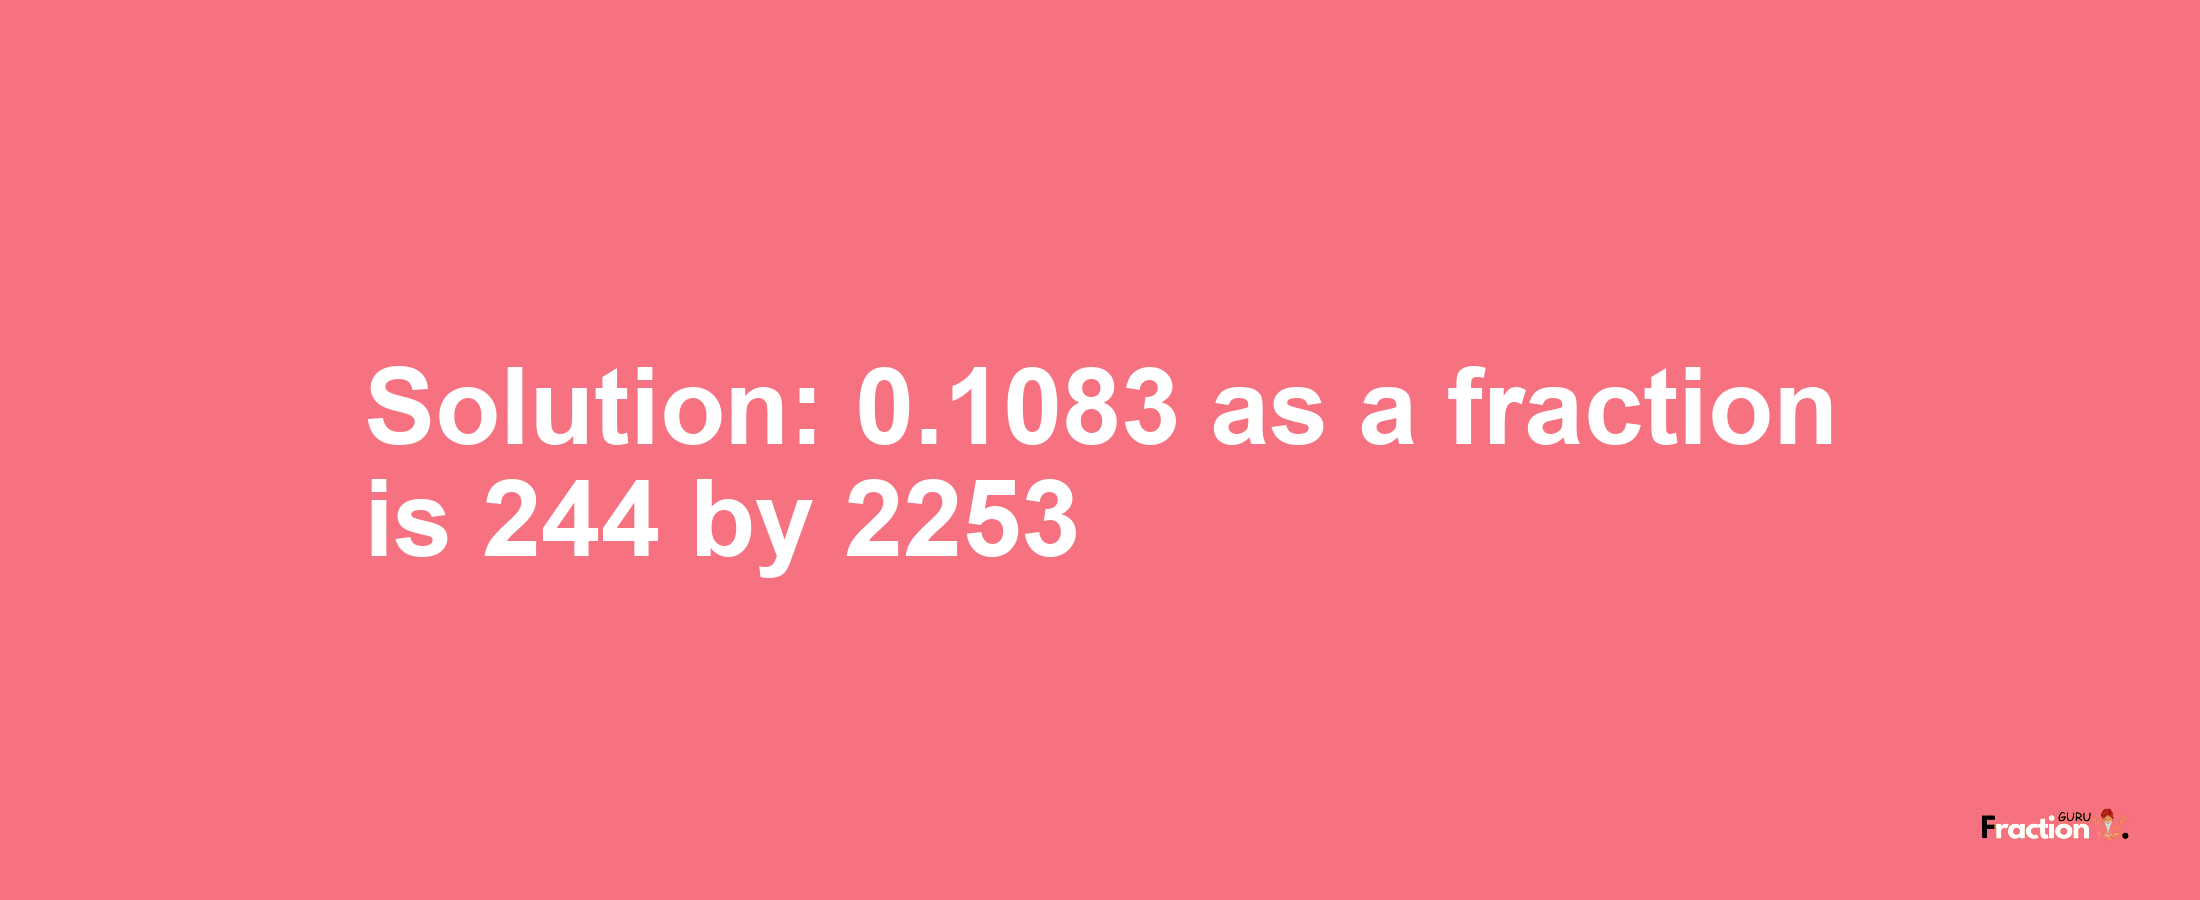 Solution:0.1083 as a fraction is 244/2253